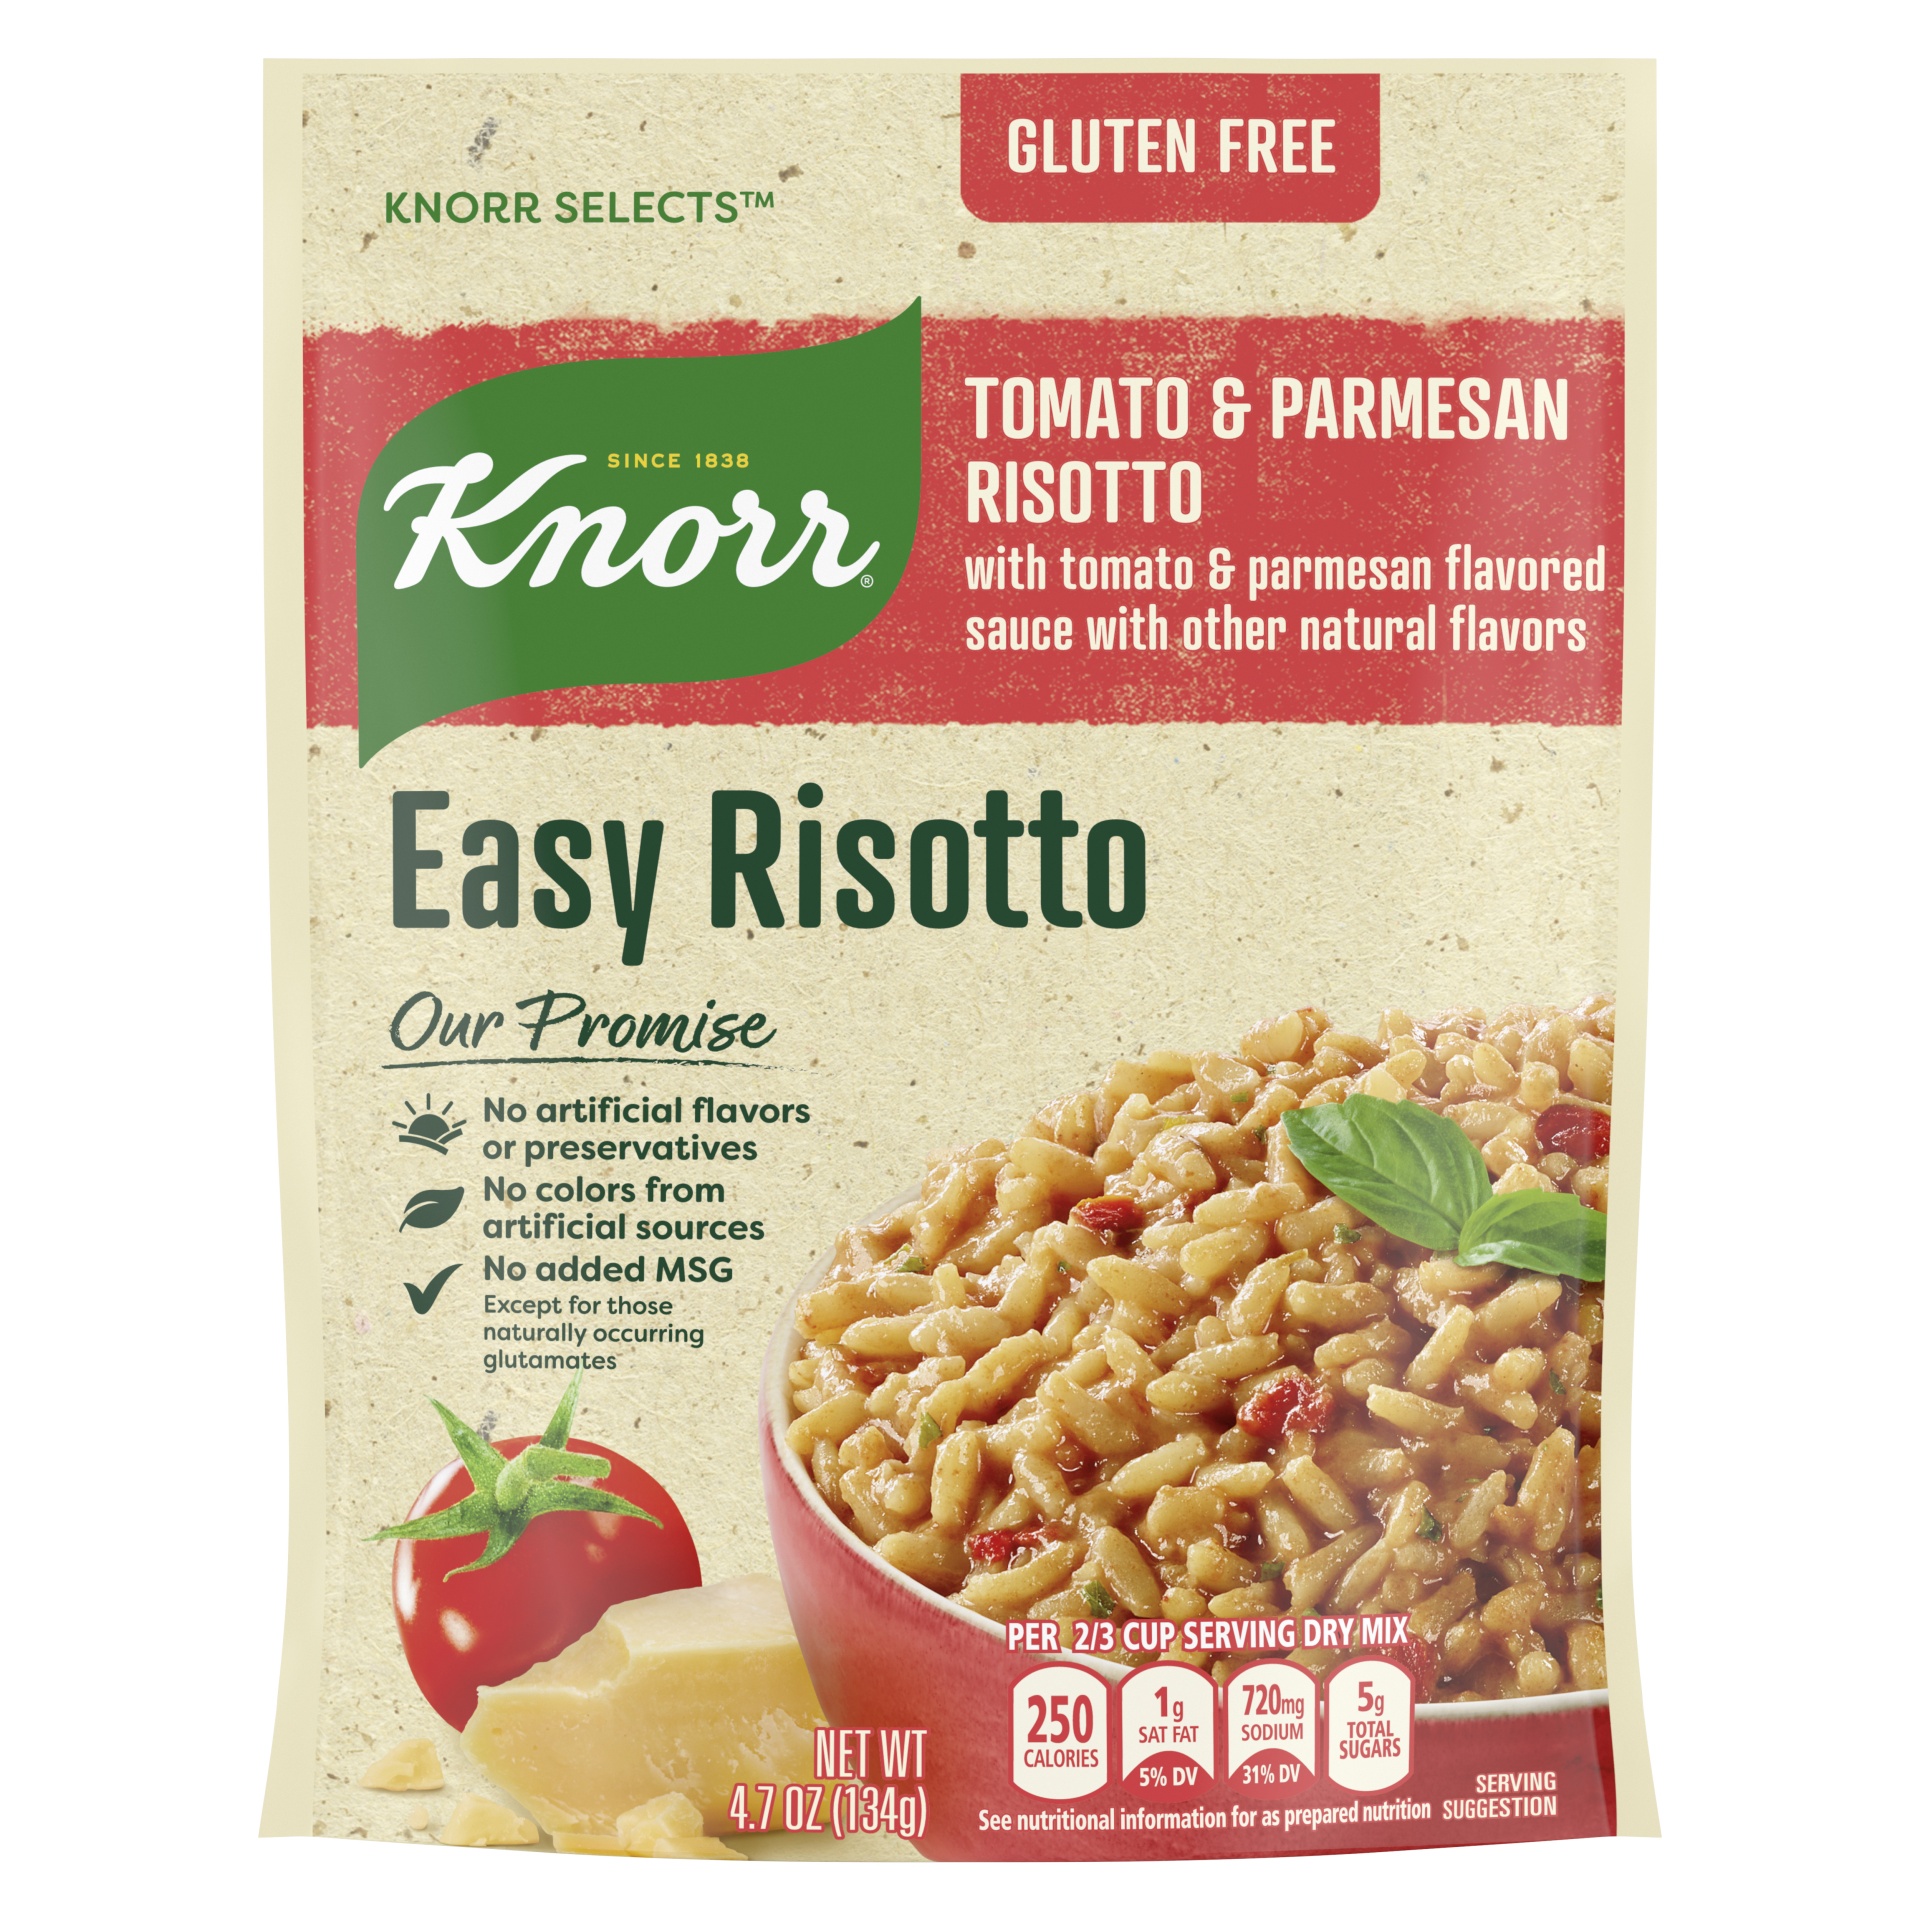 slide 1 of 1, Knorr Selects Easy Risotto Tomato & Parmesan, 4.7 oz